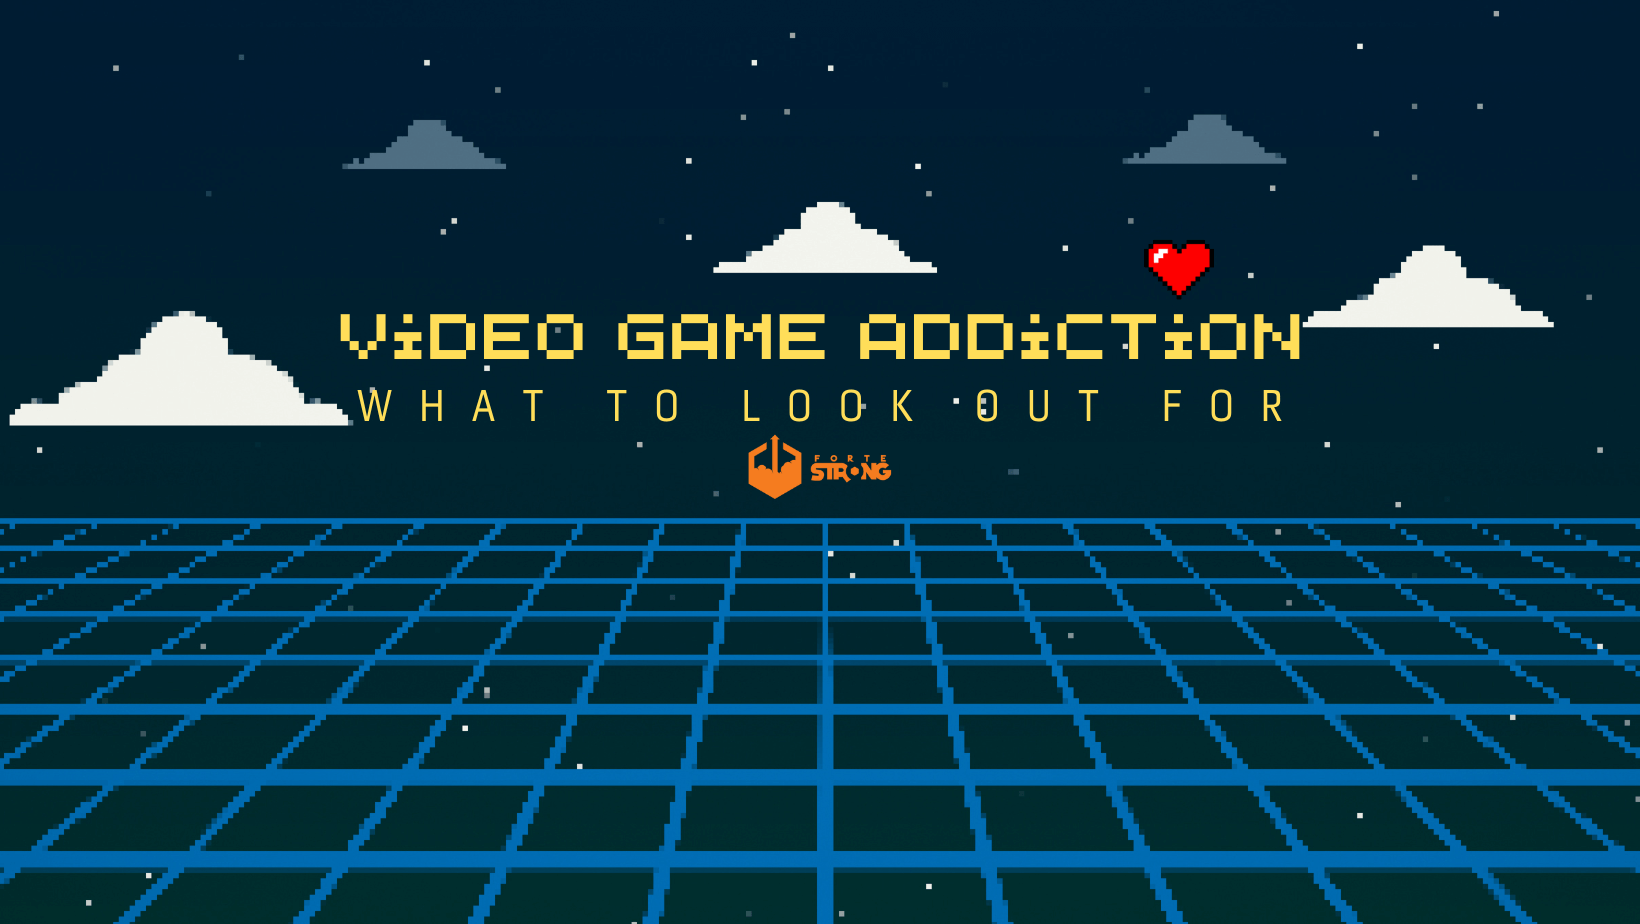 Video Game Addiction: Signs to Look Out For